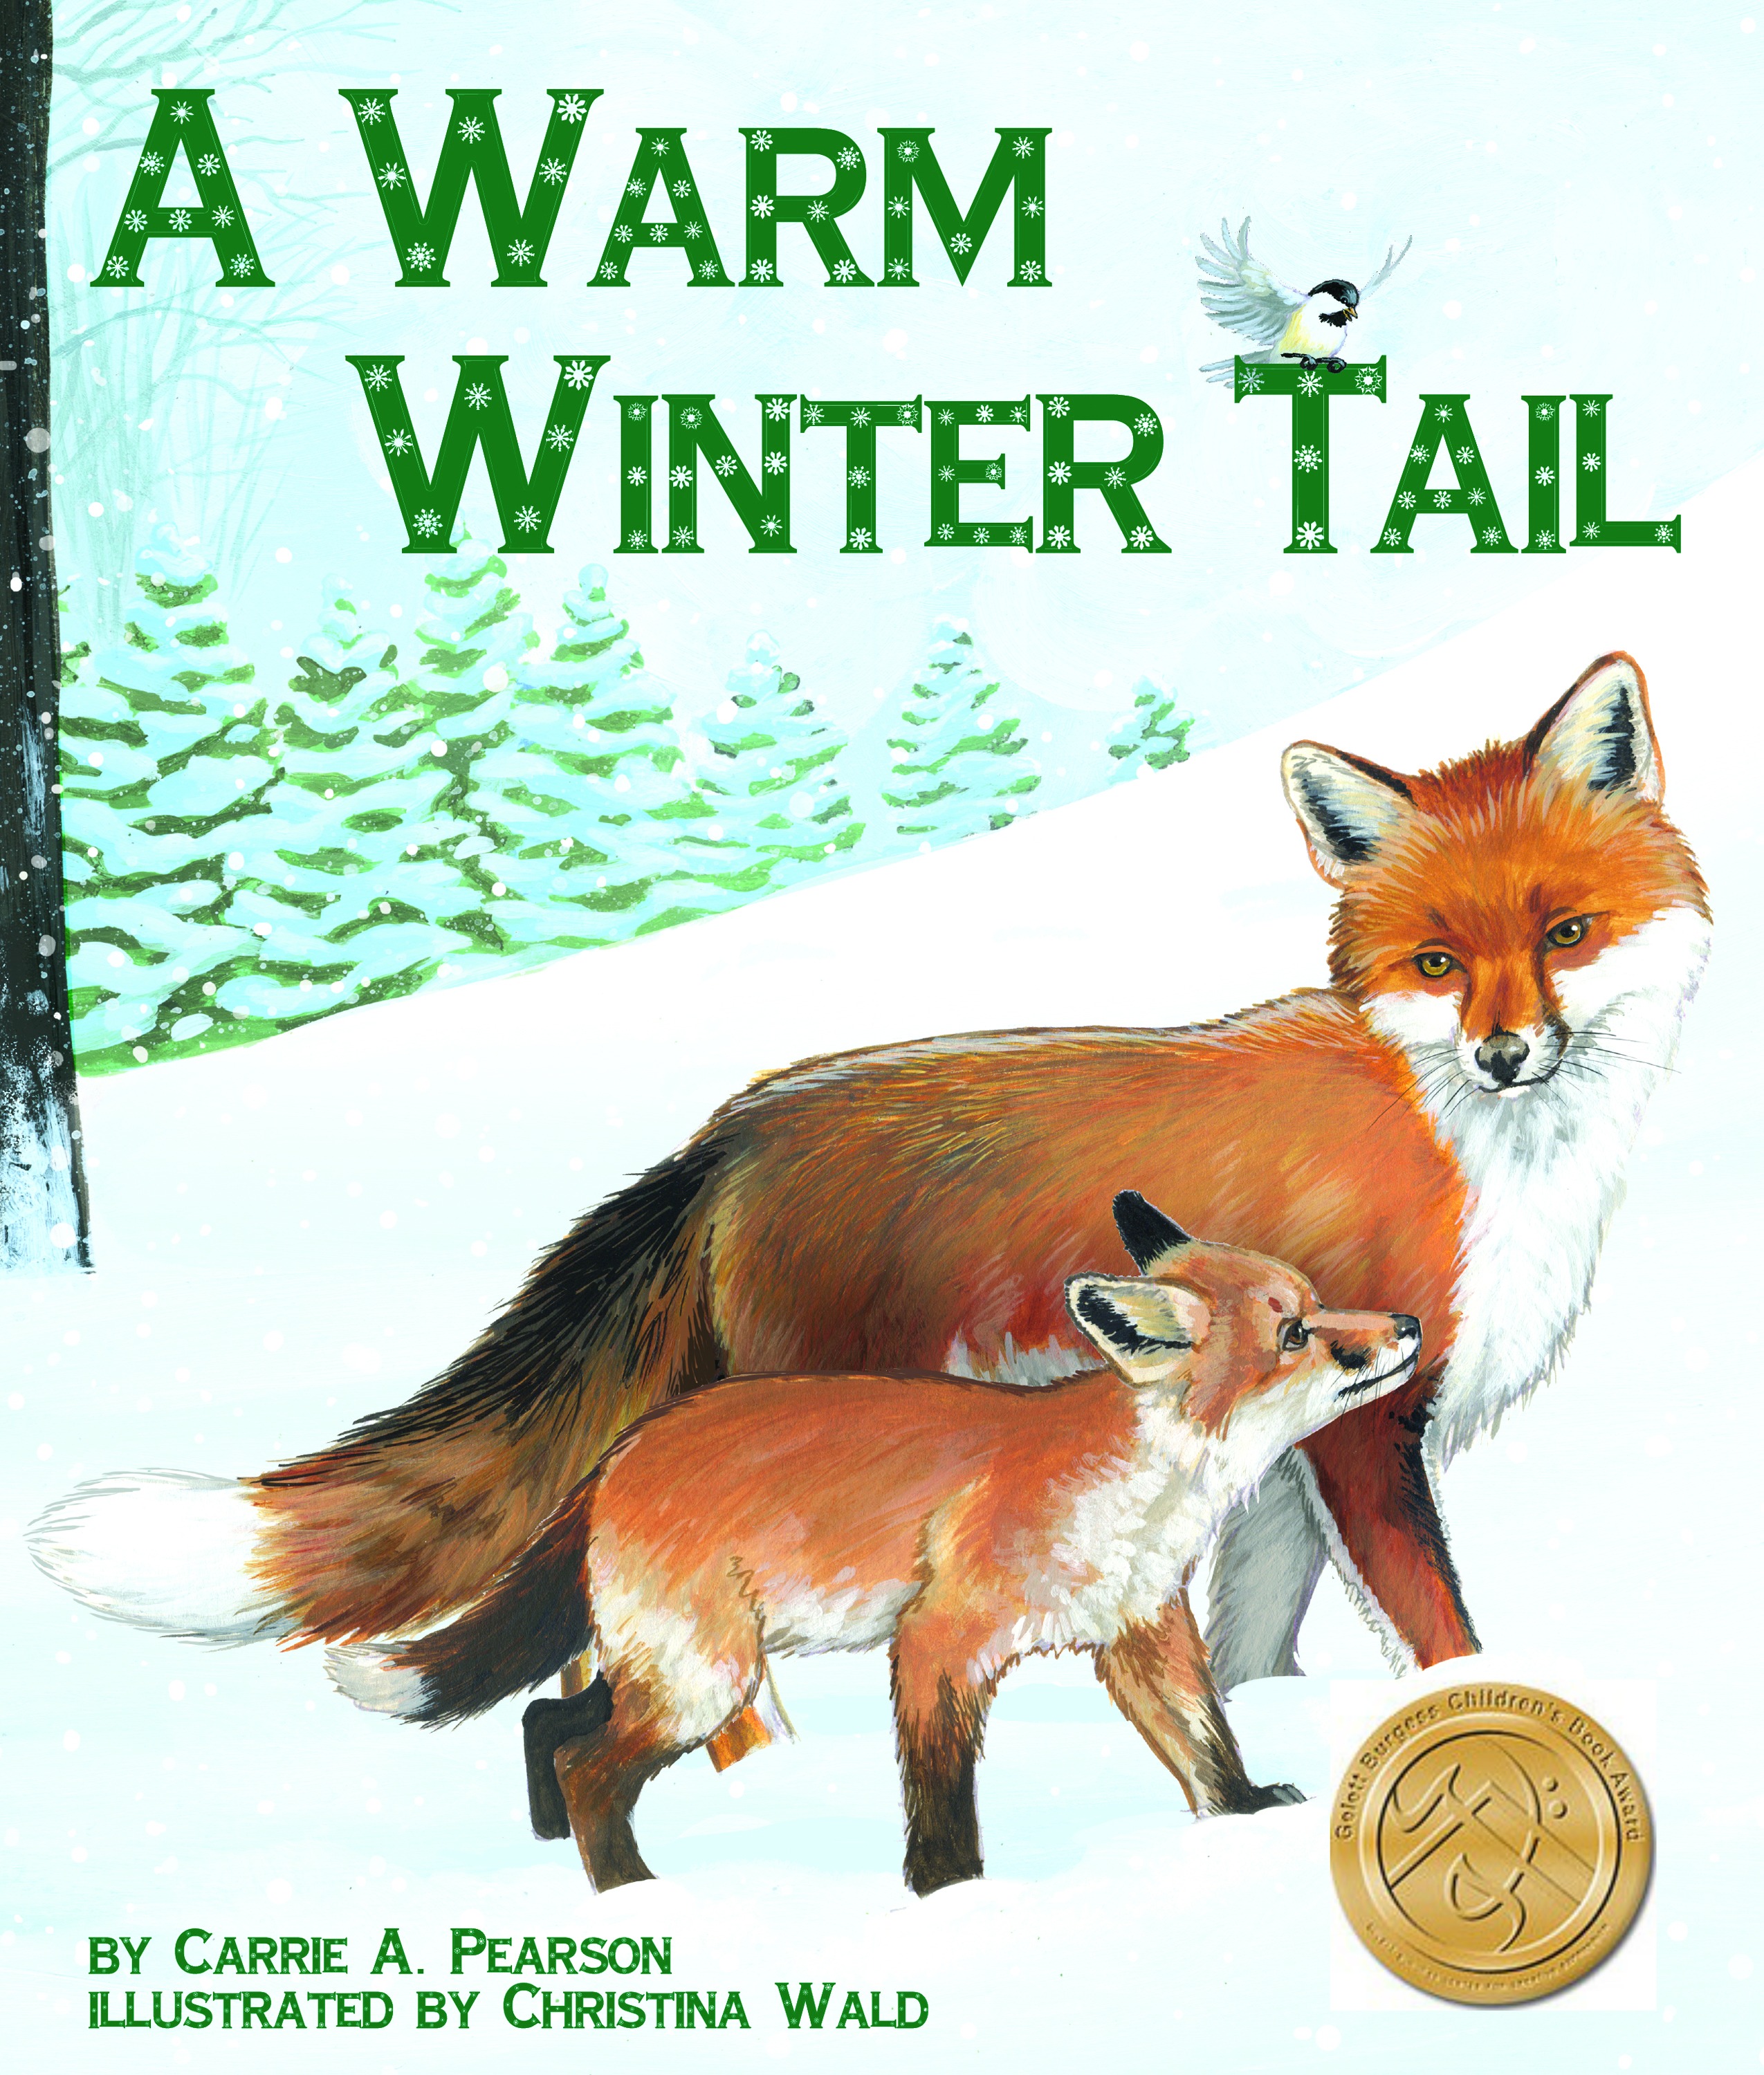 WarmWinter cover art high res with Burgess Award